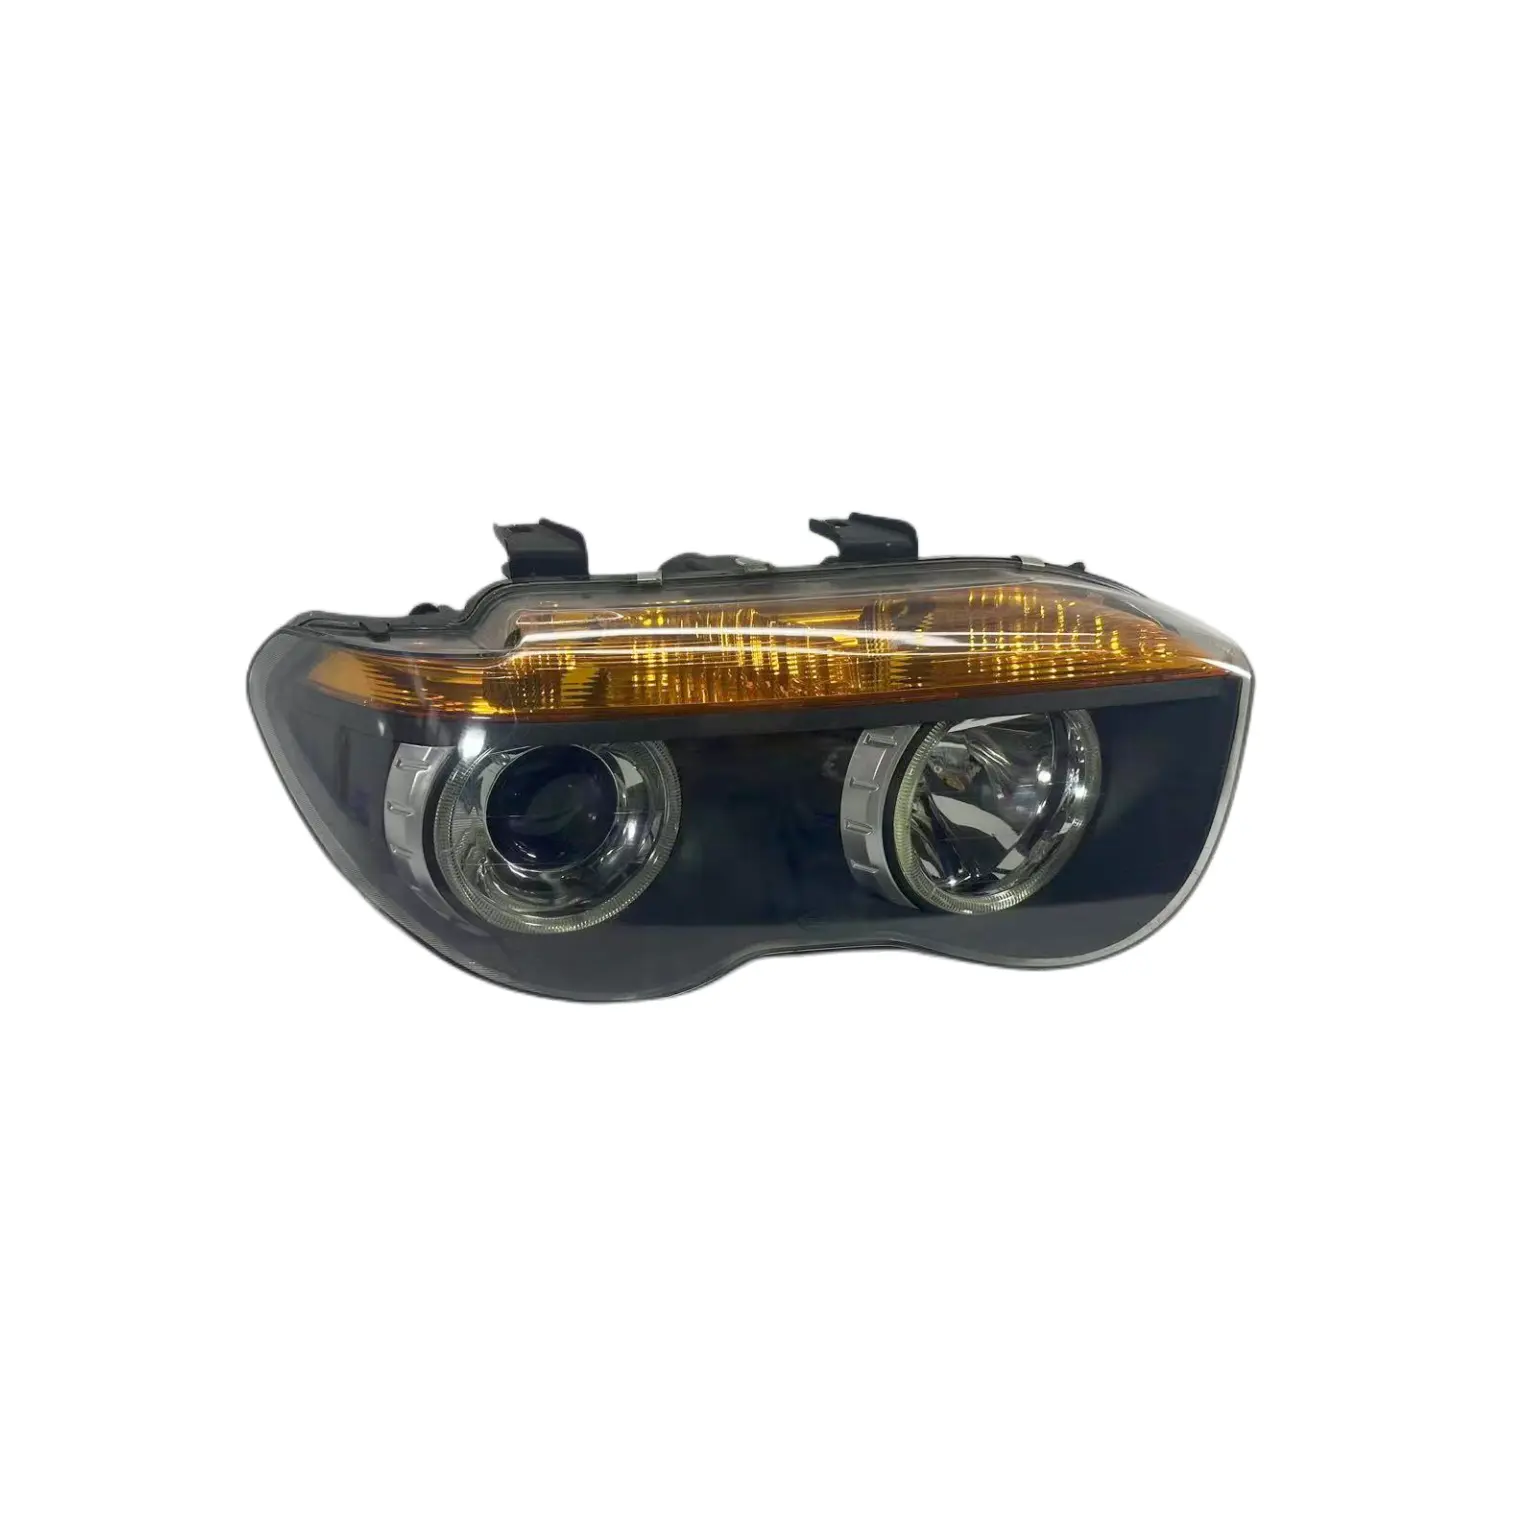 Car Styling Head Lamp for BMW 7 series hernia Headlight LED Auto Accessories